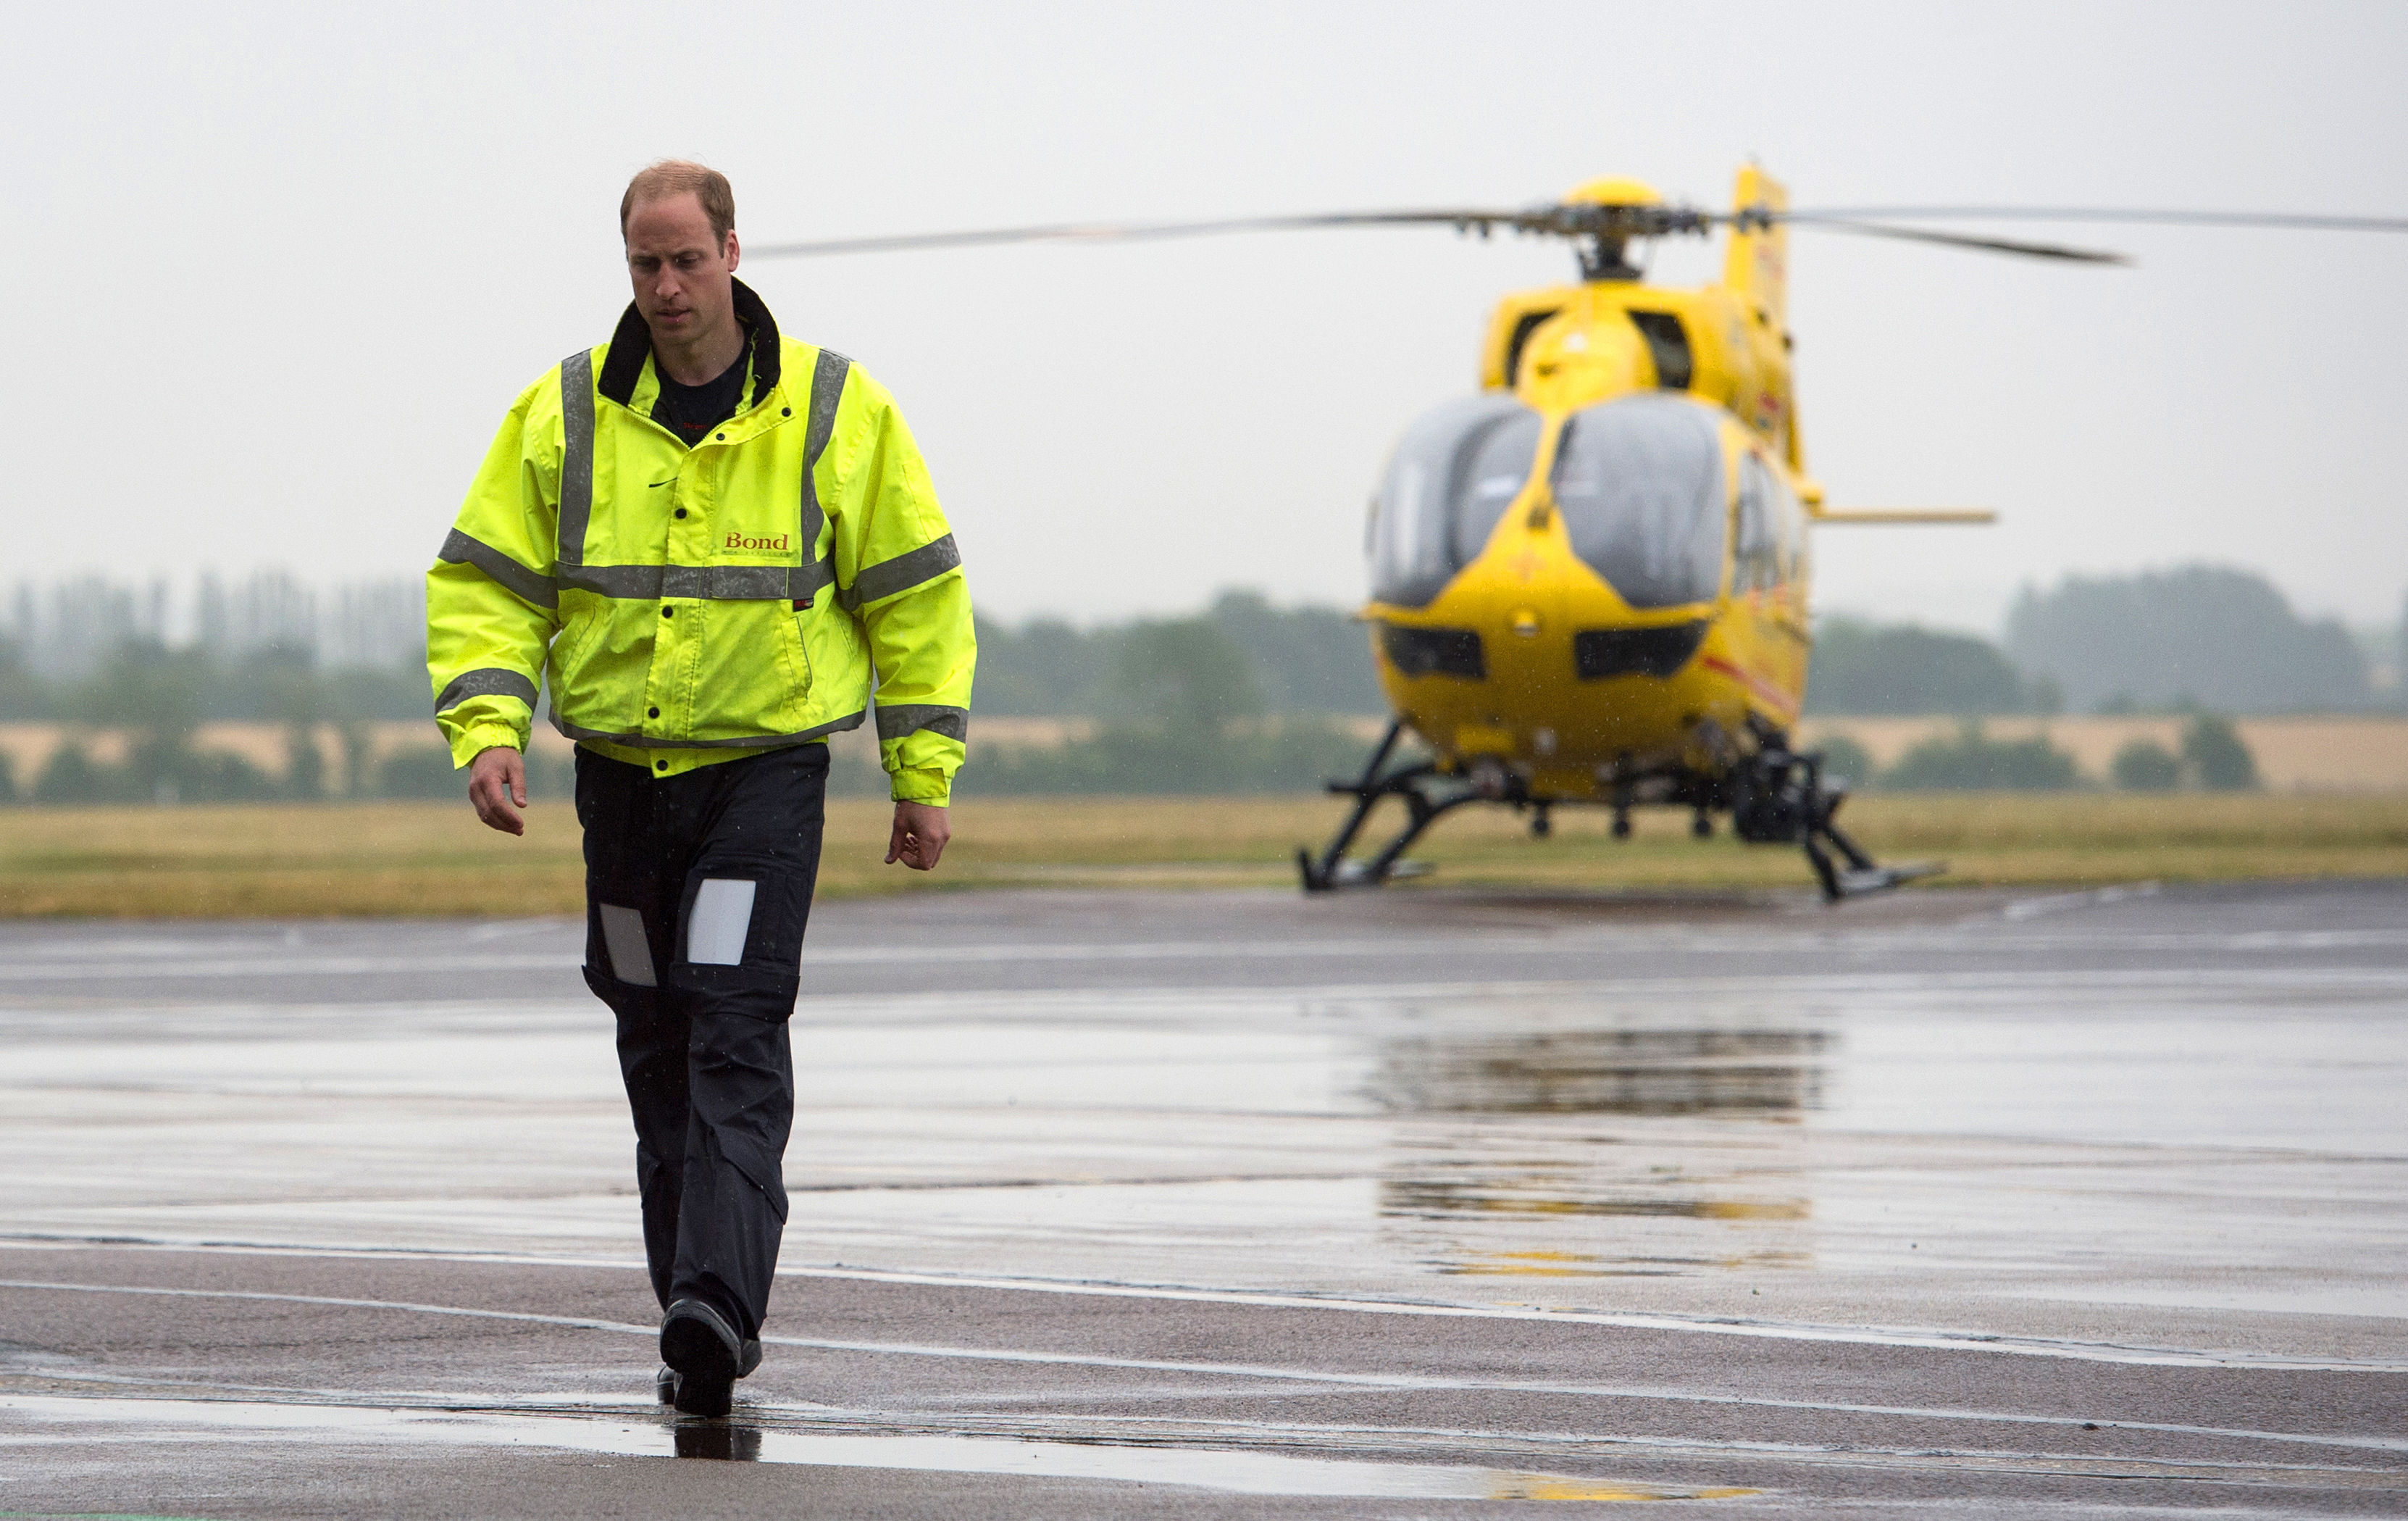 The Duke of Cambridge starting his job with the East Anglian Air Ambulance (EAAA